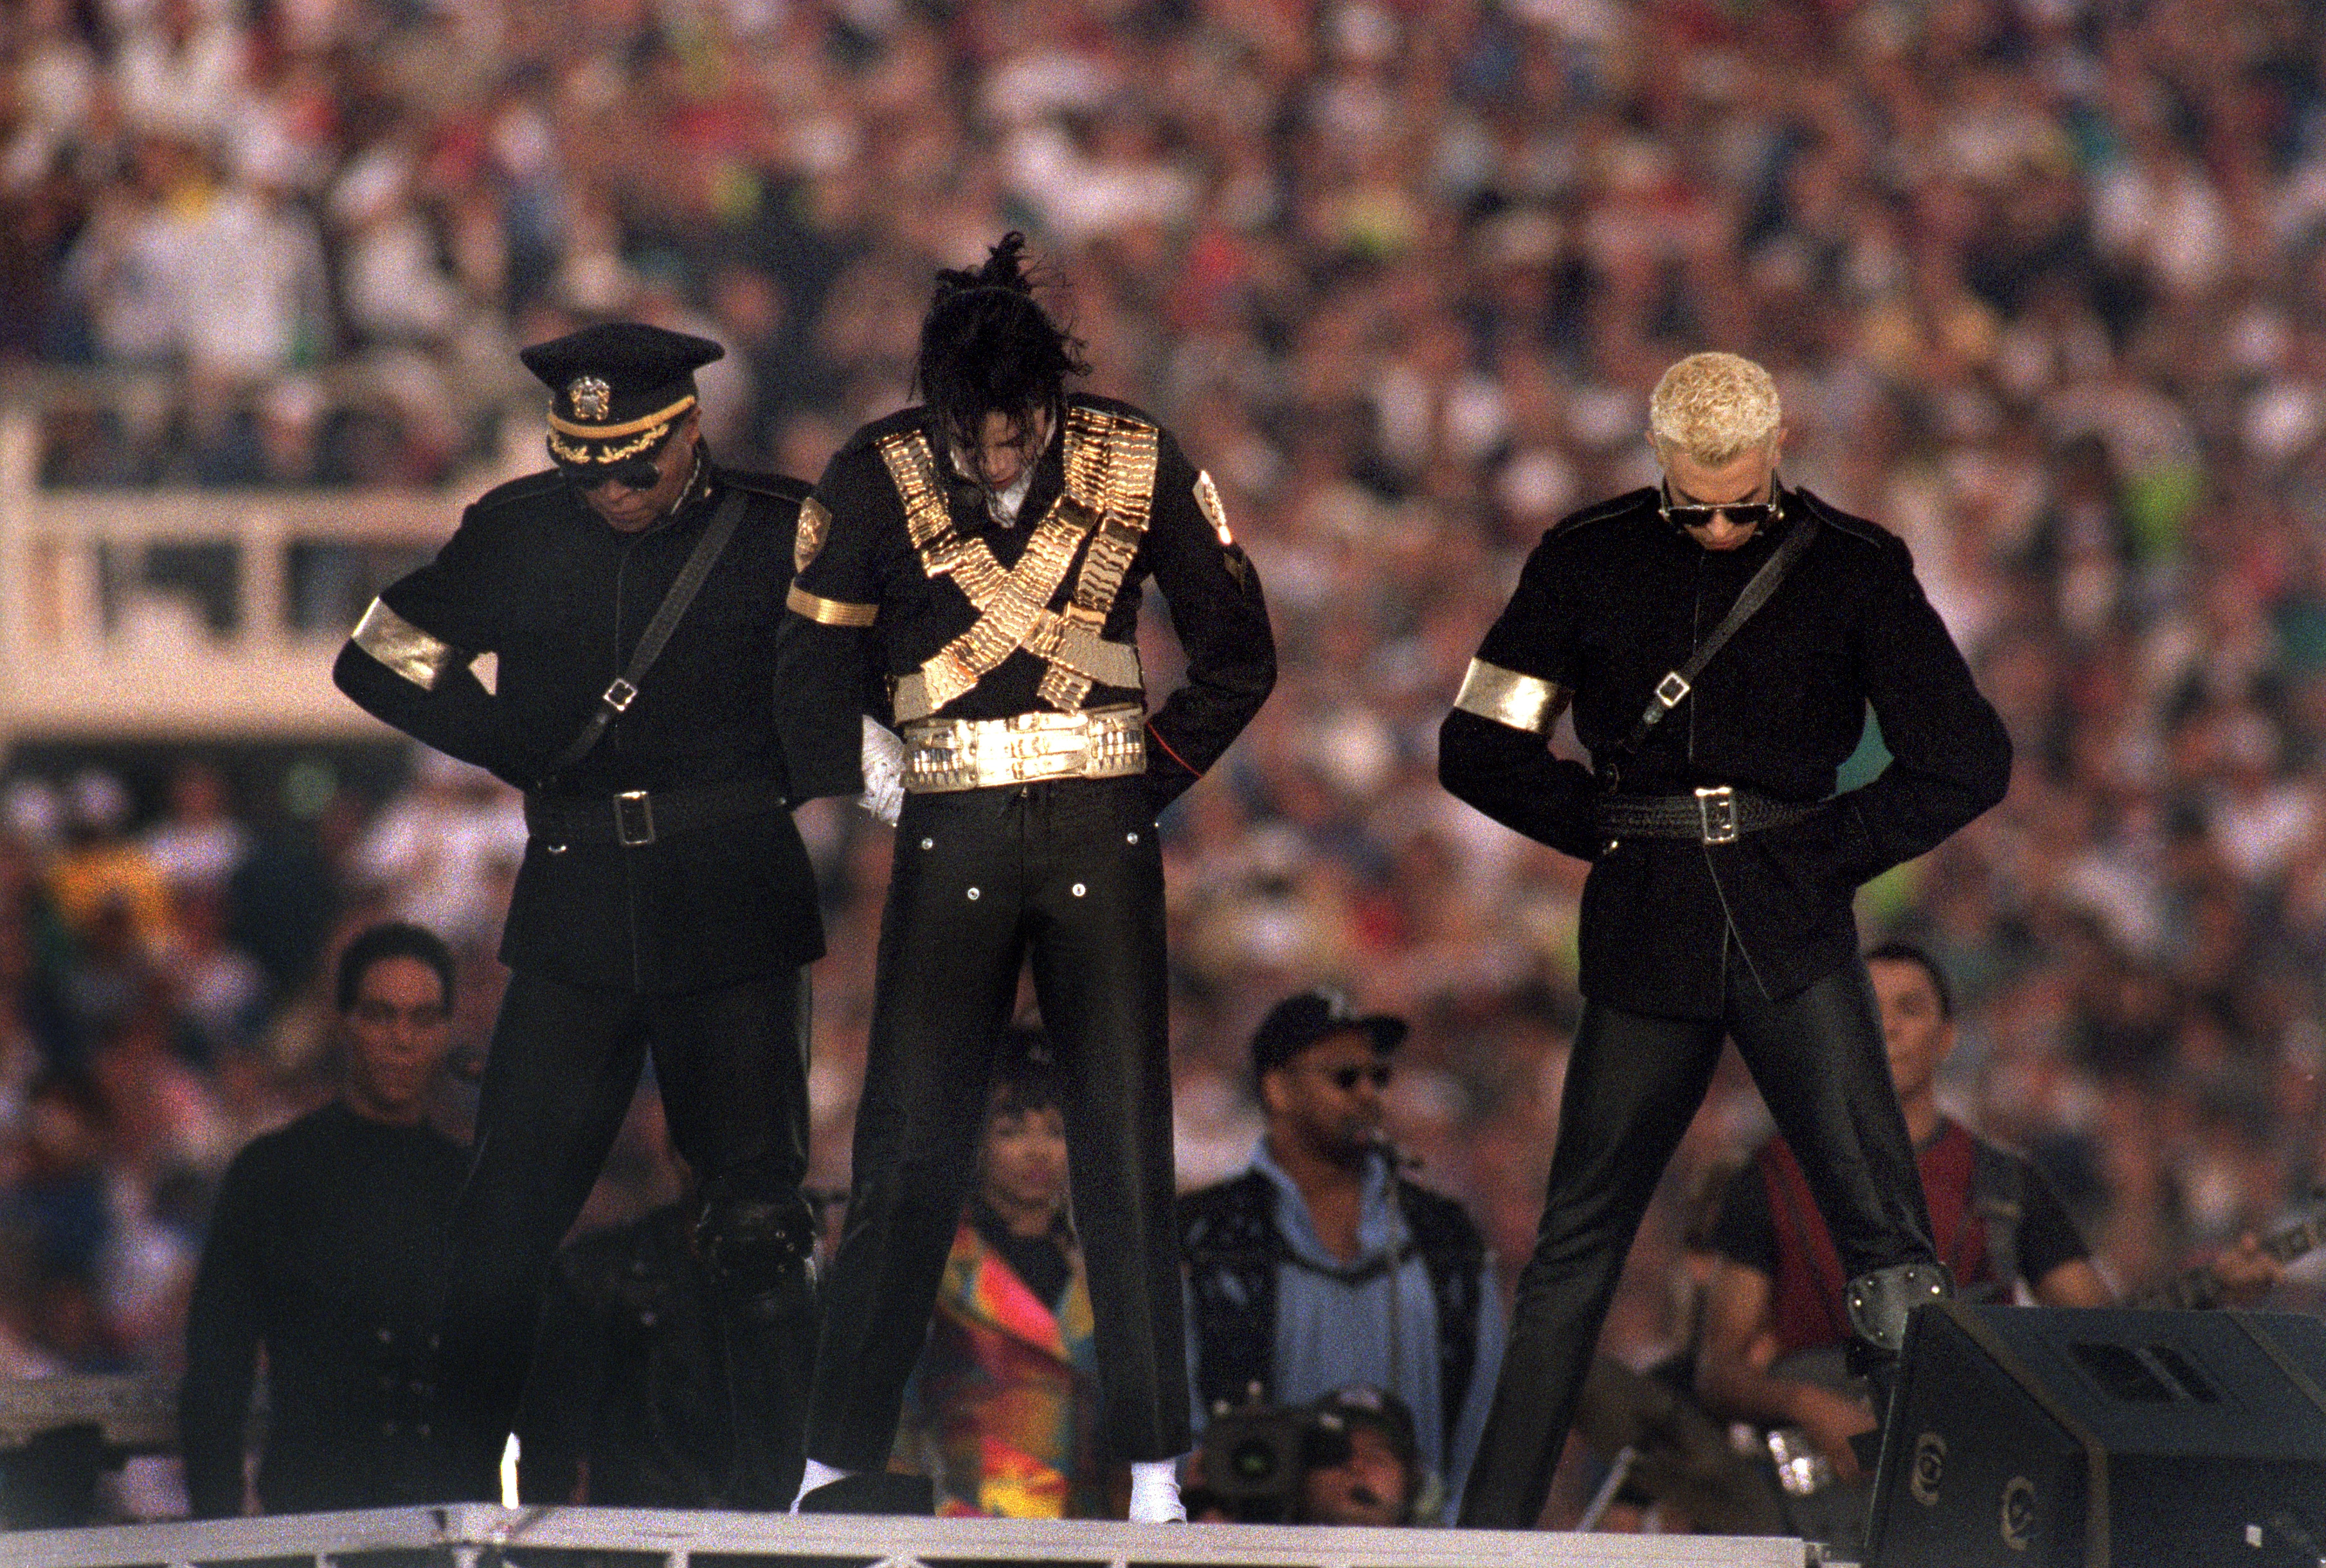 PASADENA, CA - JANUARY 31: Michael Jackson performs during the Halftime show as the Dallas Cowboys take on the Buffalo Bills in Super Bowl XXVII at Rose Bowl on January 31, 1993 in Pasadena, California. The Cowboys won 52-17. (Photo by George Rose/Getty Images)